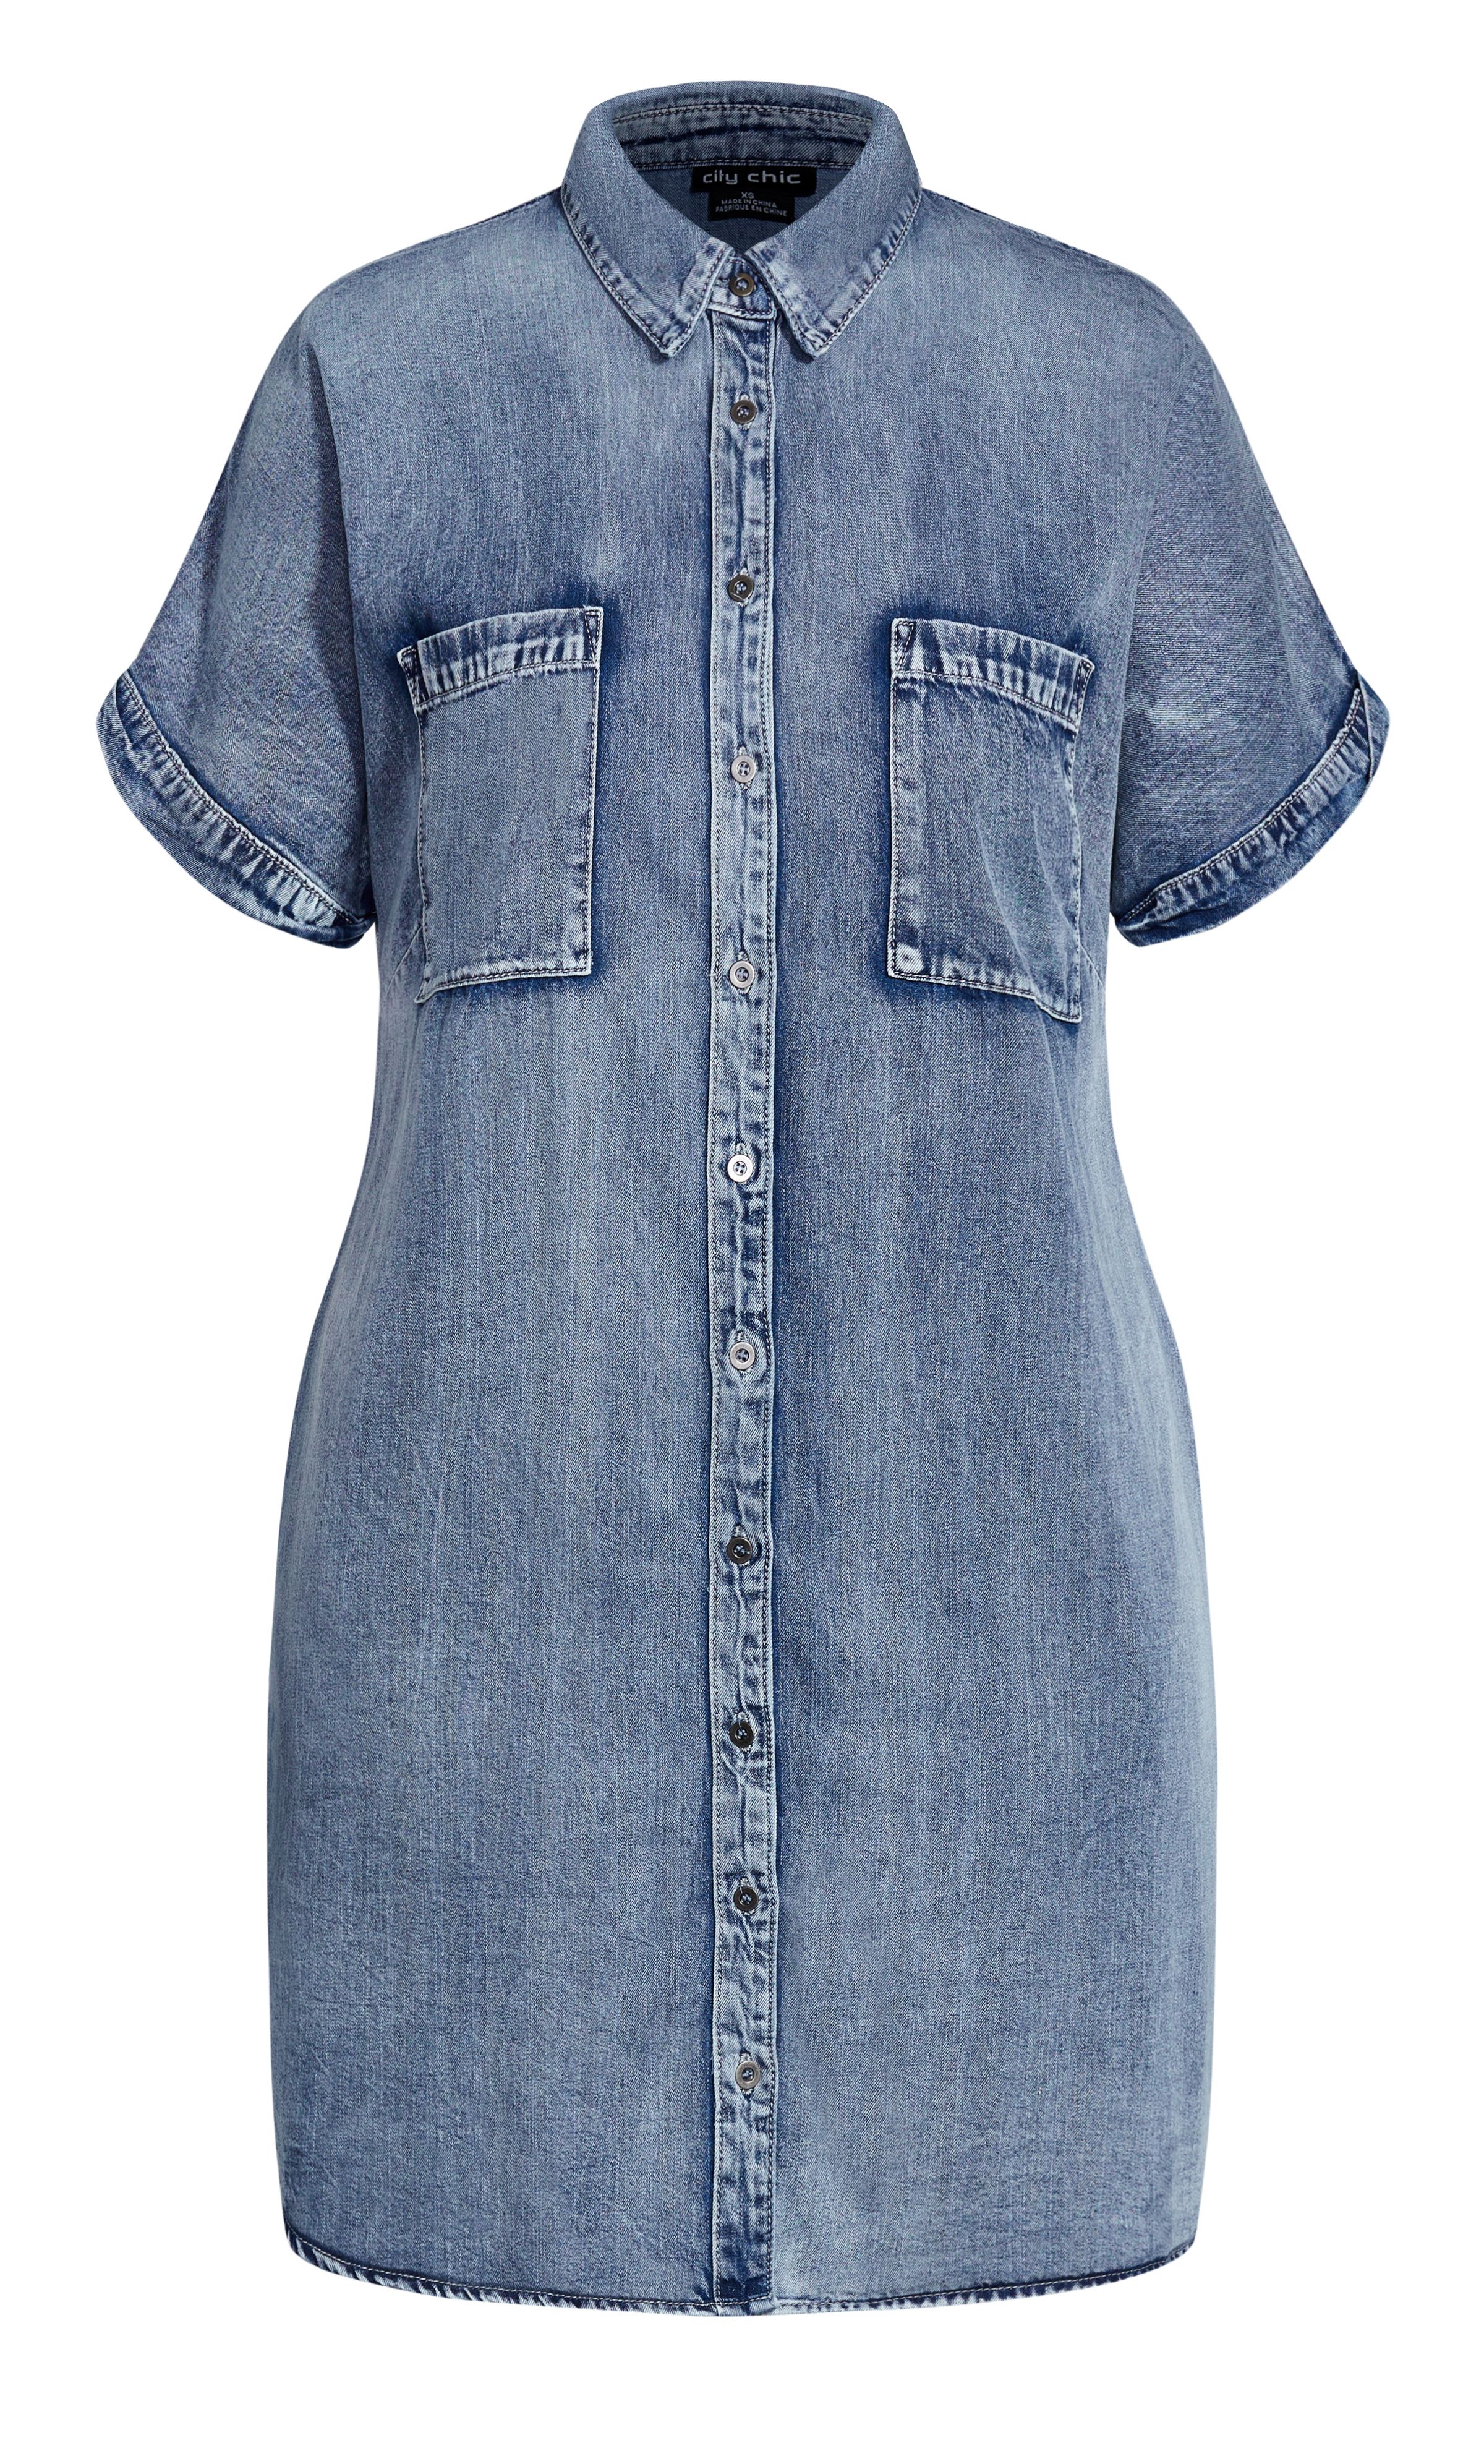 Elevated by a 100% Cotton denim fabrication, the Denim Sleek Dress is a sought after summer staple. It flaunts a workable button up front as well as handy side pockets to hold your everyday essentials. Key Features Include: - Collared neckline - Short cuffed sleeves - Buttoned front - Two breast pockets - Two side pockets - Breathable 100% Cotton fabrication - Unlined - Mini length Add ankle boots and oversized sunglasses for a mega cool street style aesthetic.